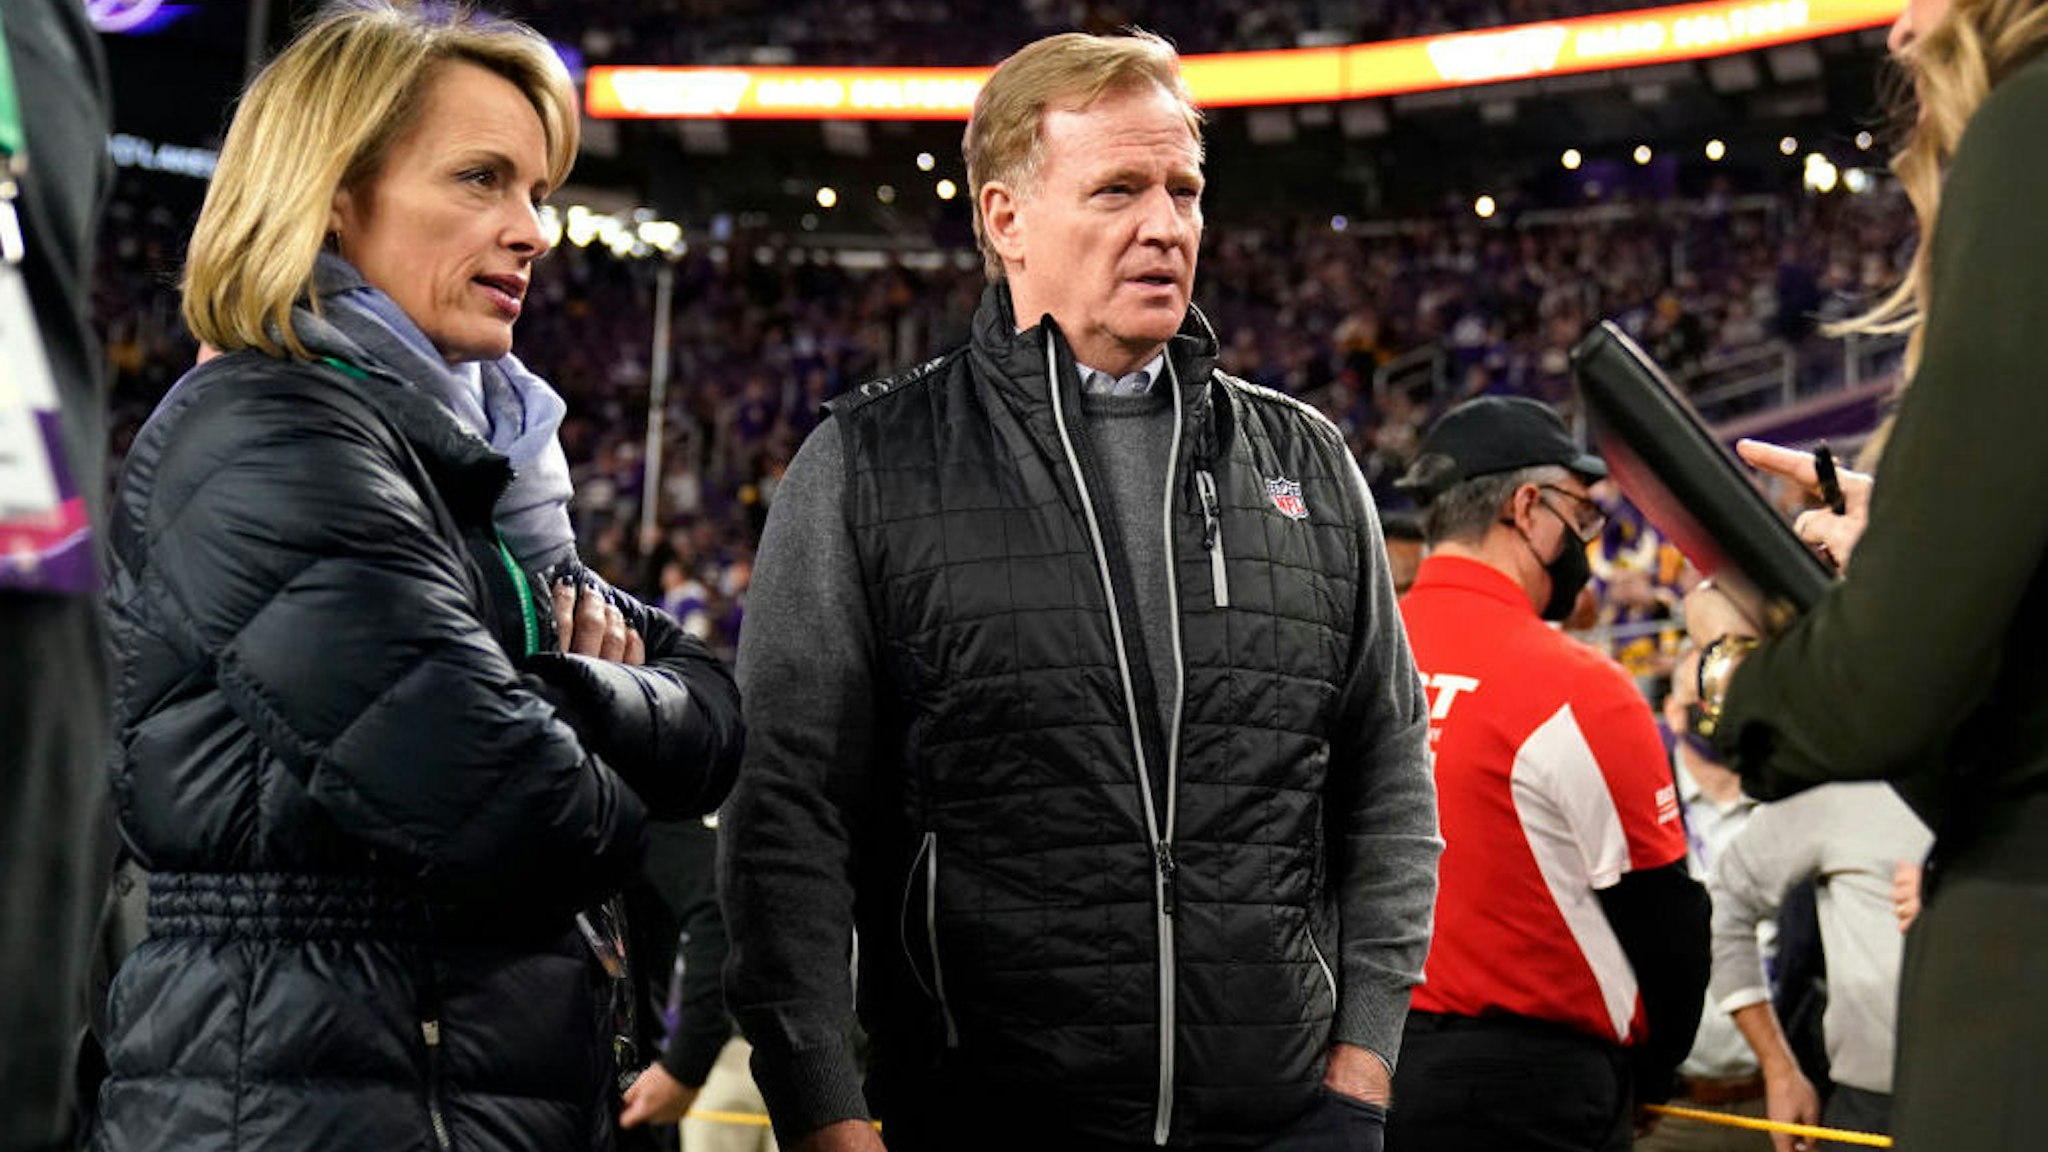 MINNEAPOLIS, MN - DECEMBER 09: NFL commissioner Roger Goodell and his wife Jane Skinner chat with a staff member before a game between the Minnesota Vikings and Pittsburgh Steelers on December 9, 2021, at U.S. Bank Stadium in Minneapolis, MN.(Photo by Nick Wosika/Icon Sportswire via Getty Images)